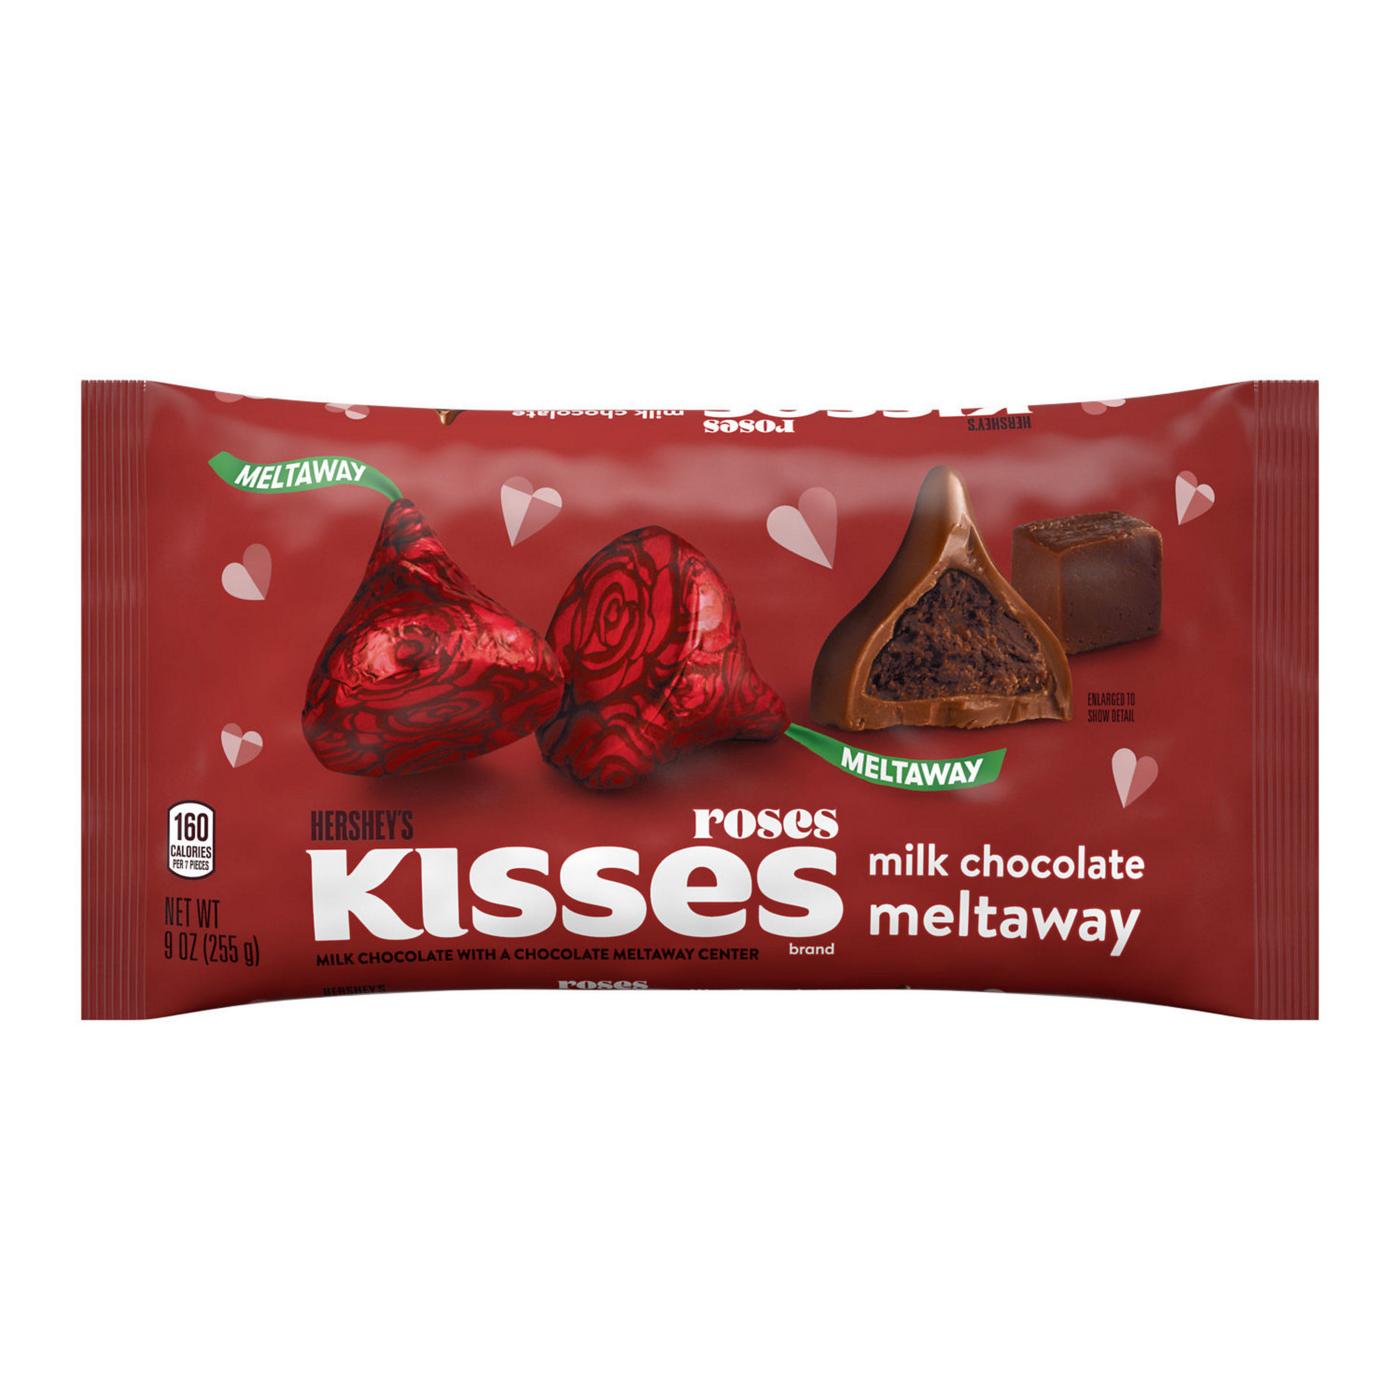 Hershey's Kisses Roses Milk Chocolate Meltaway Valentine's Candy; image 1 of 7